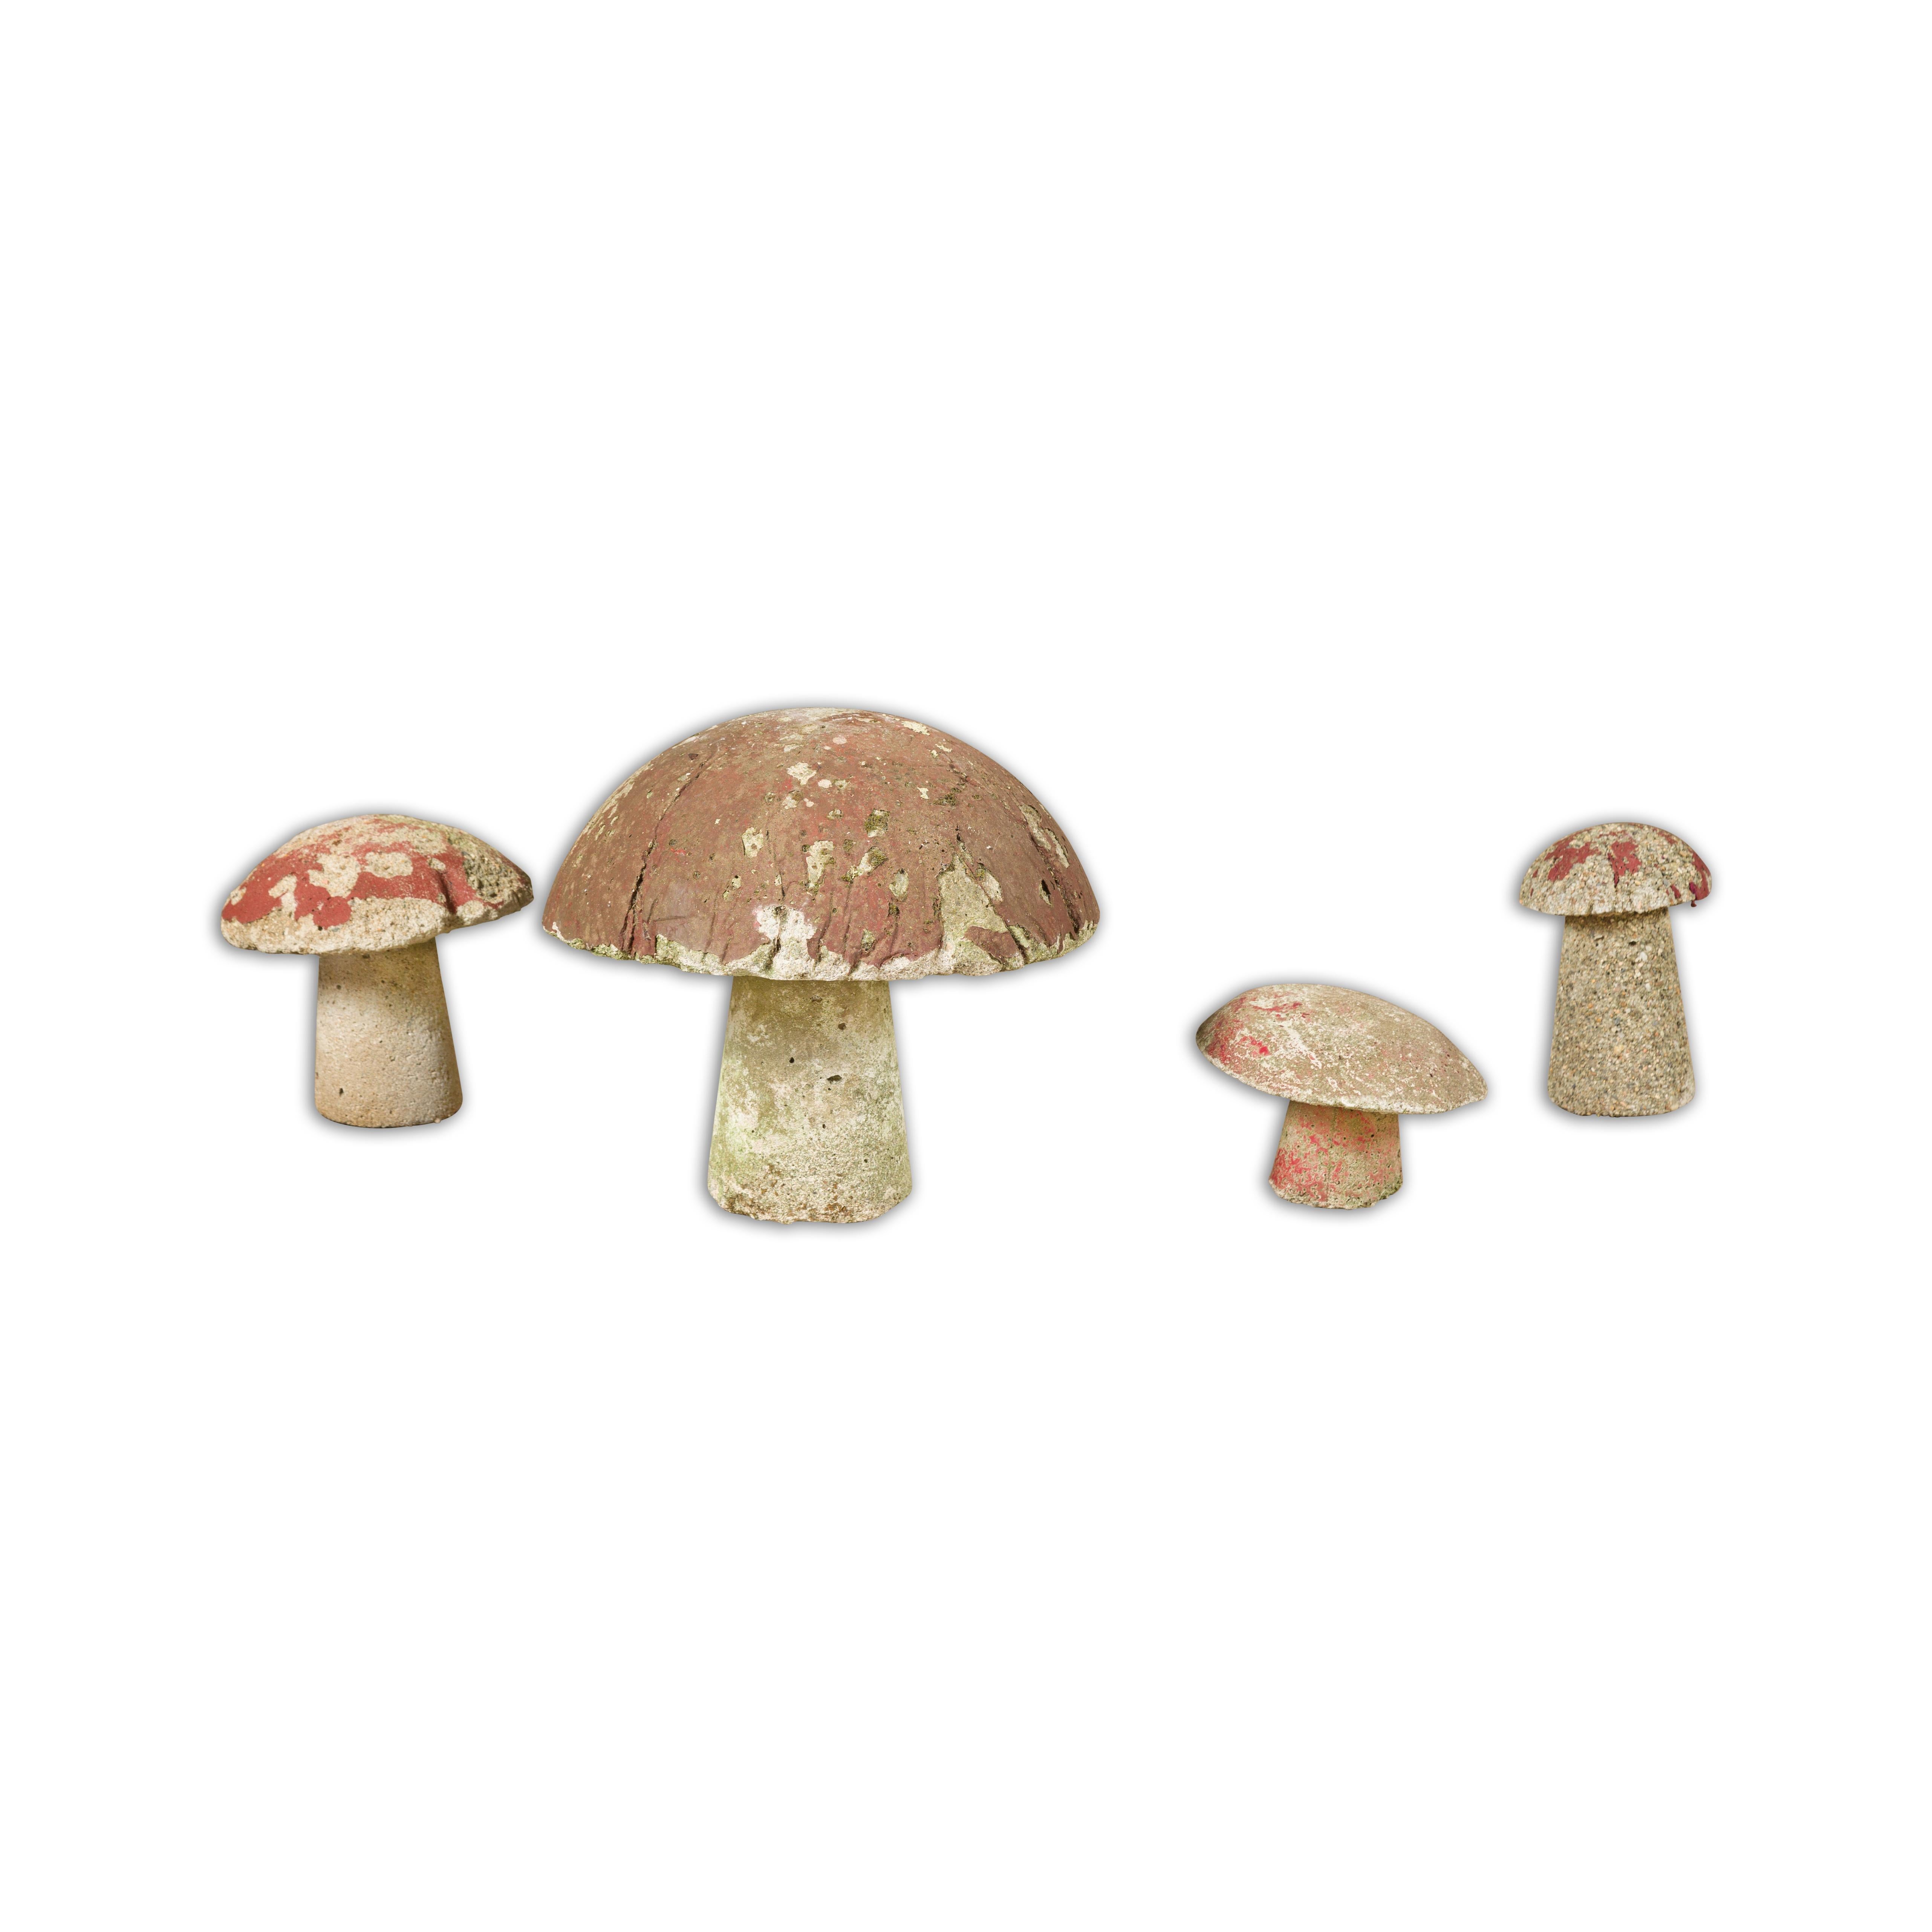 A set of four American Midcentury painted concrete mushroom garden ornaments with red tops and nicely weathered appearance. Whimsically inviting, this set of four American Midcentury painted concrete mushroom garden ornaments lends an enchanting